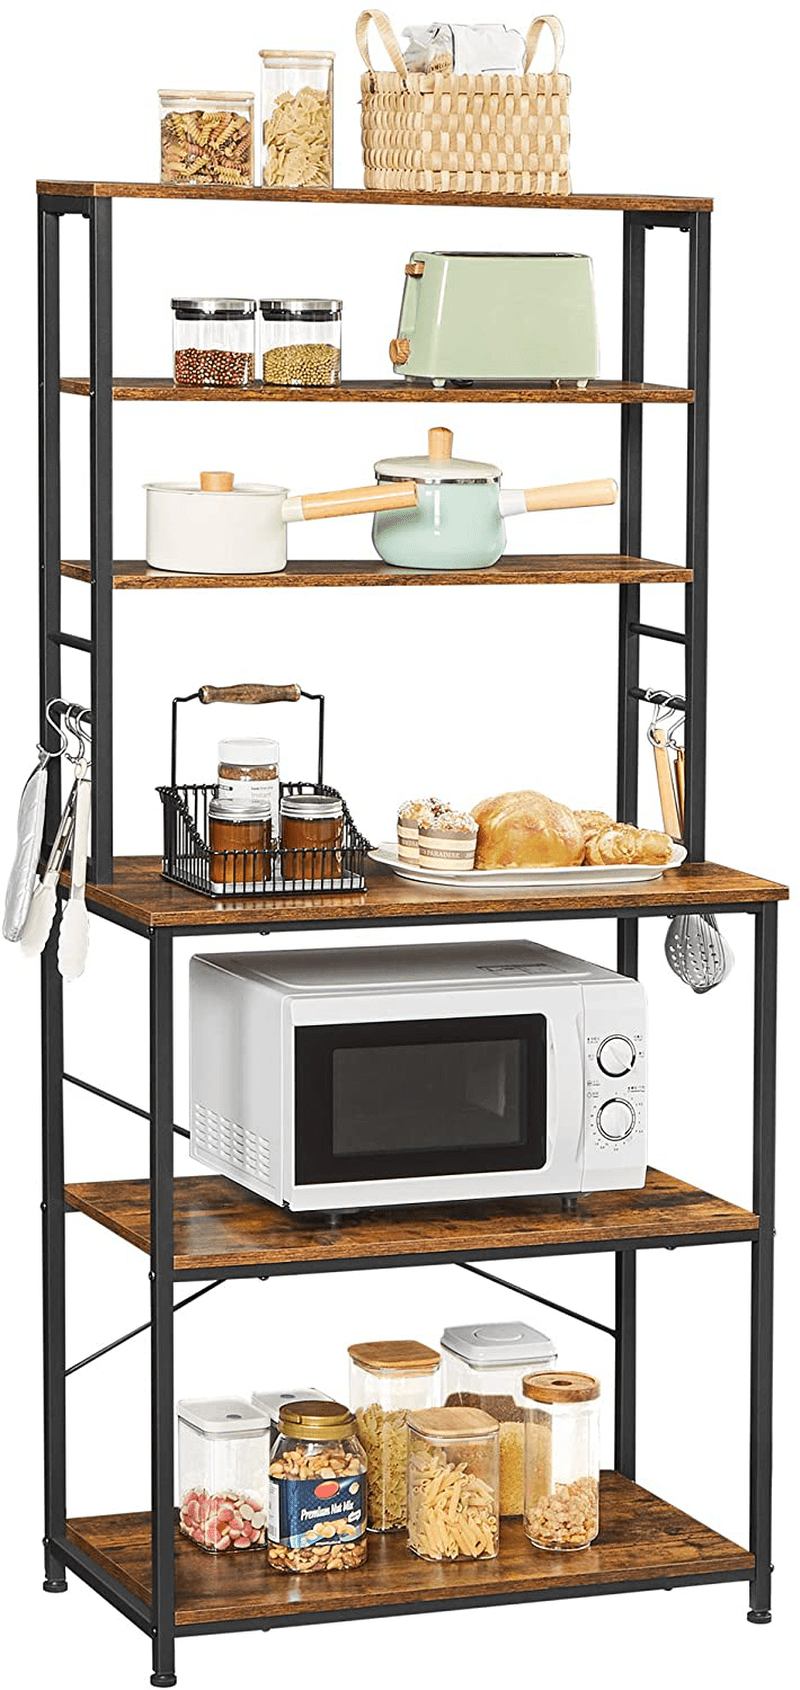 VASAGLE Baker'S Rack, Microwave Oven Stand, 6-Tier Kitchen Utility Storage Shelf, 6 Hooks and Metal Frame, Industrial, 31.5 X 15.7 X 65.7 Inches, Rustic Brown and Black UKKS019B01